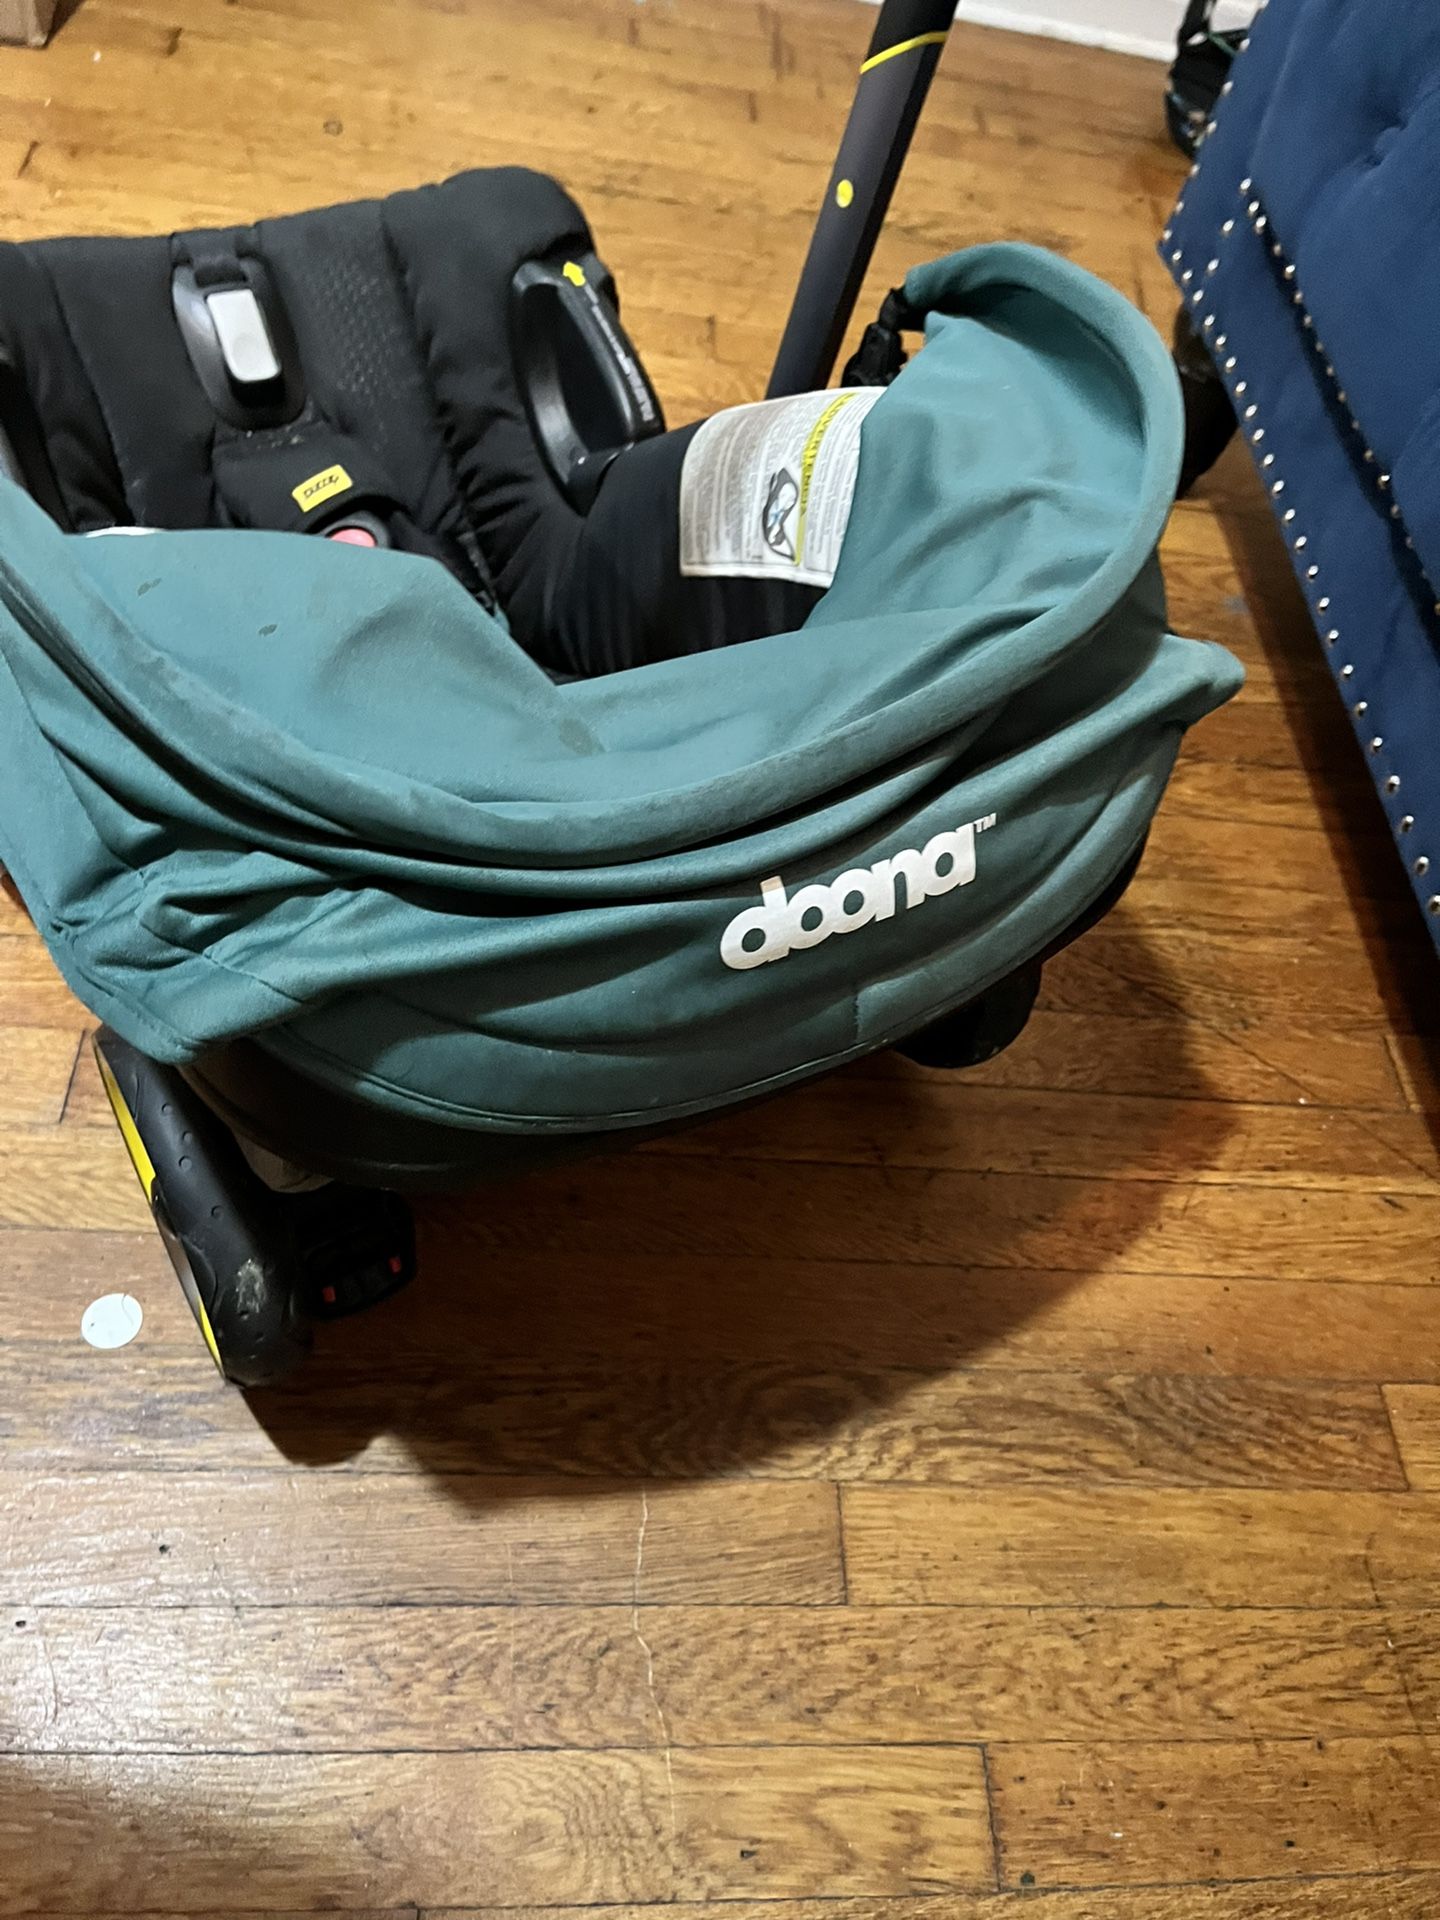 Donna car seat and base